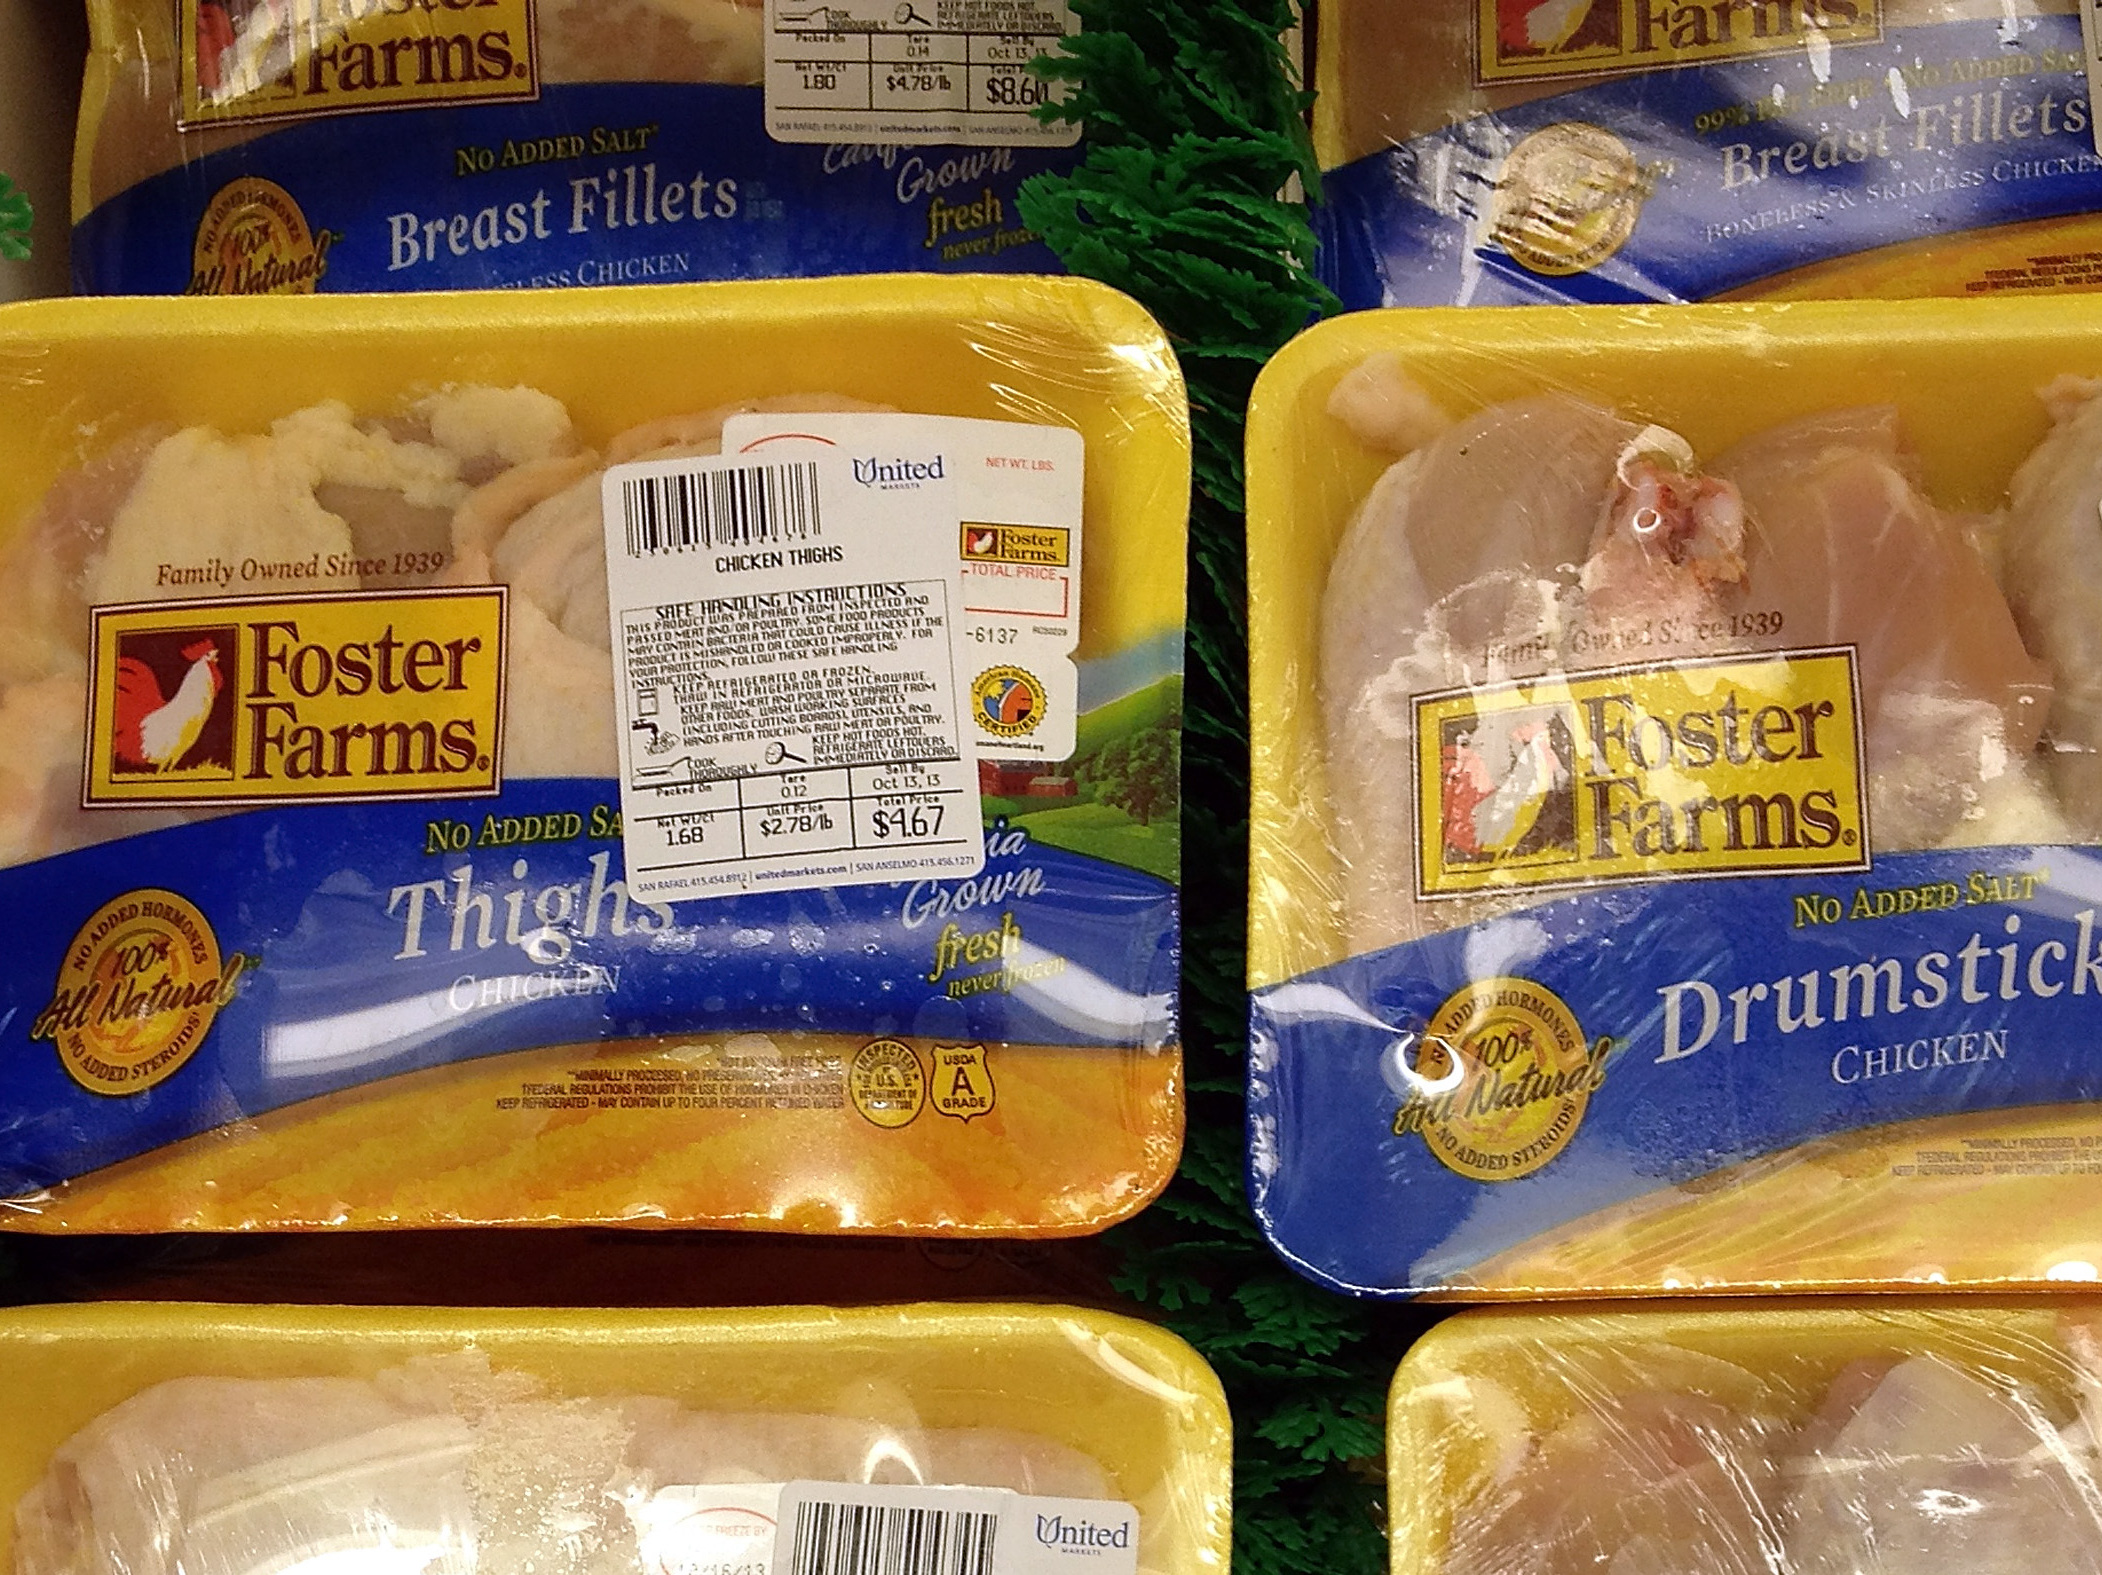 Foster Farms set up new procedures to deal with salmonella contamination after the USDA threatened to shut down its plants last fall. Photo: Justin Sullivan/Getty Images